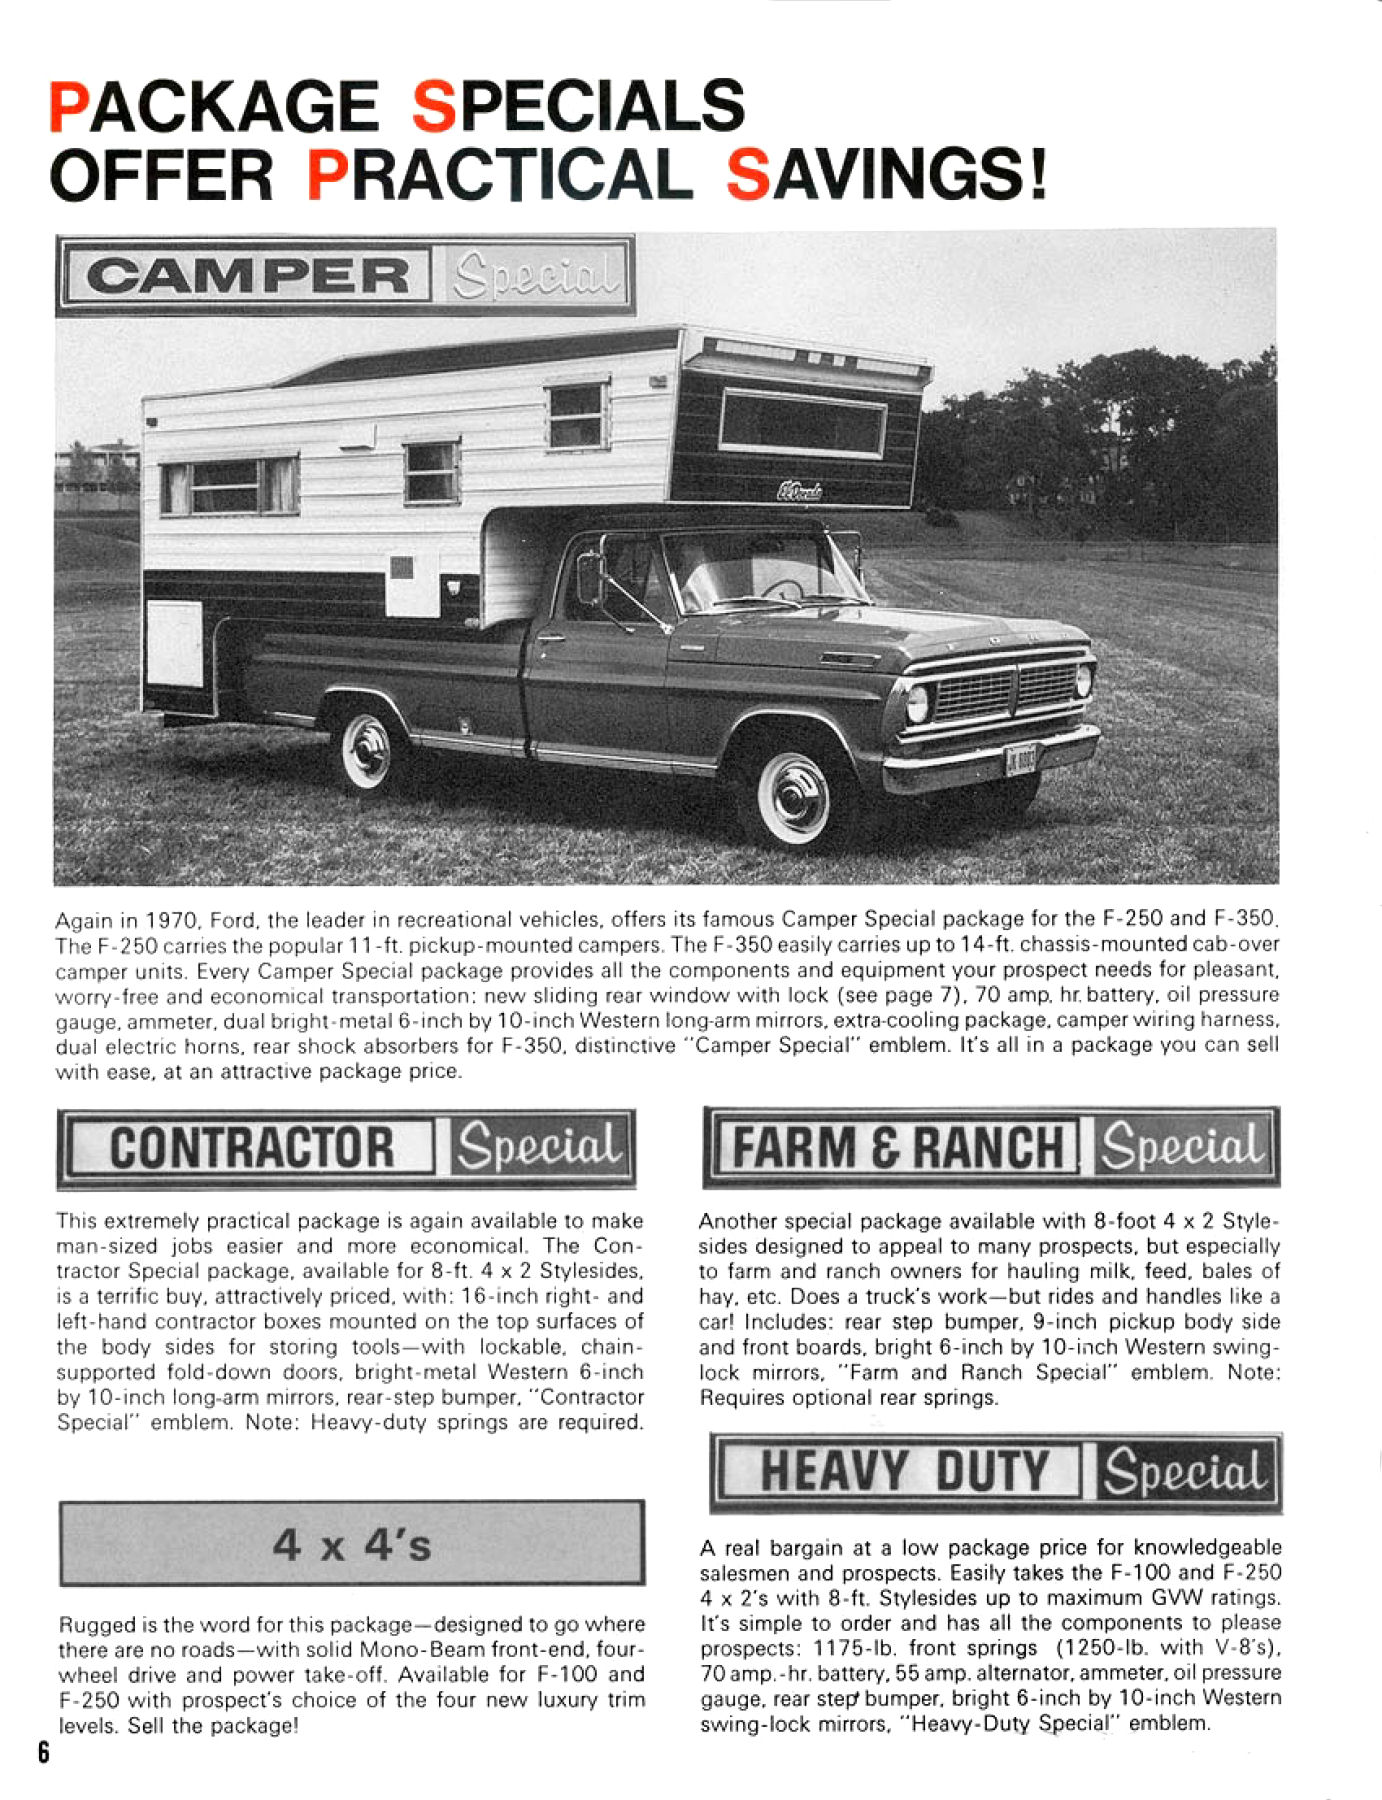 1970 Ford Light Truck Sales Features-06